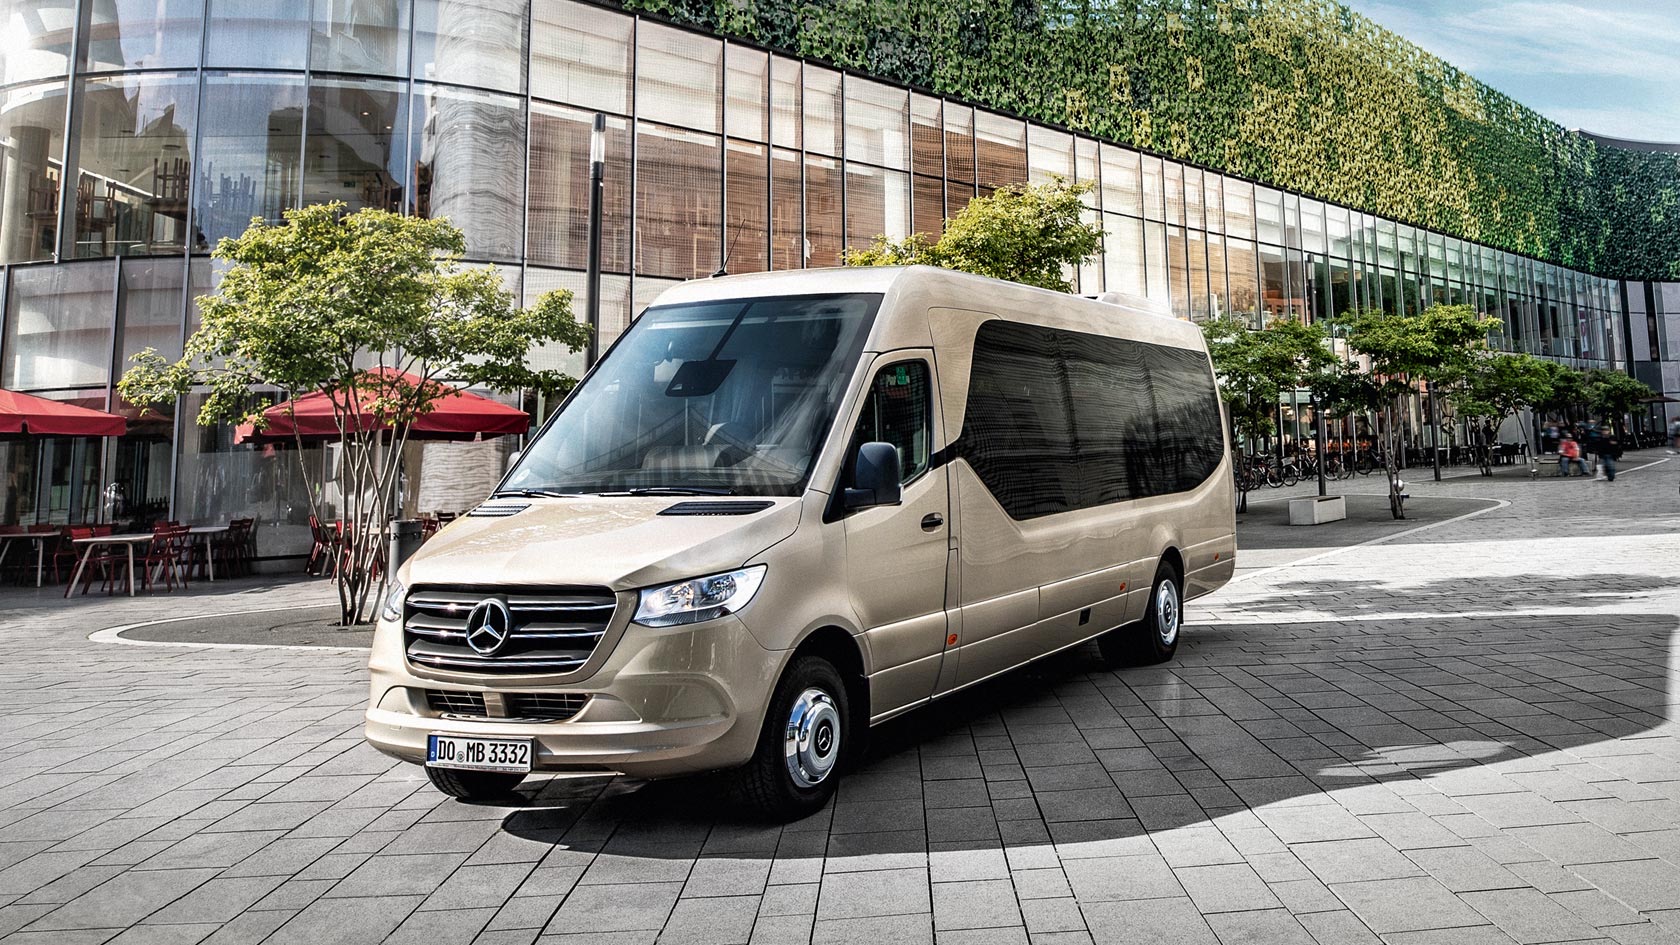 How to Choose the Best Minibus Hire Service in Seaford and East Sussex